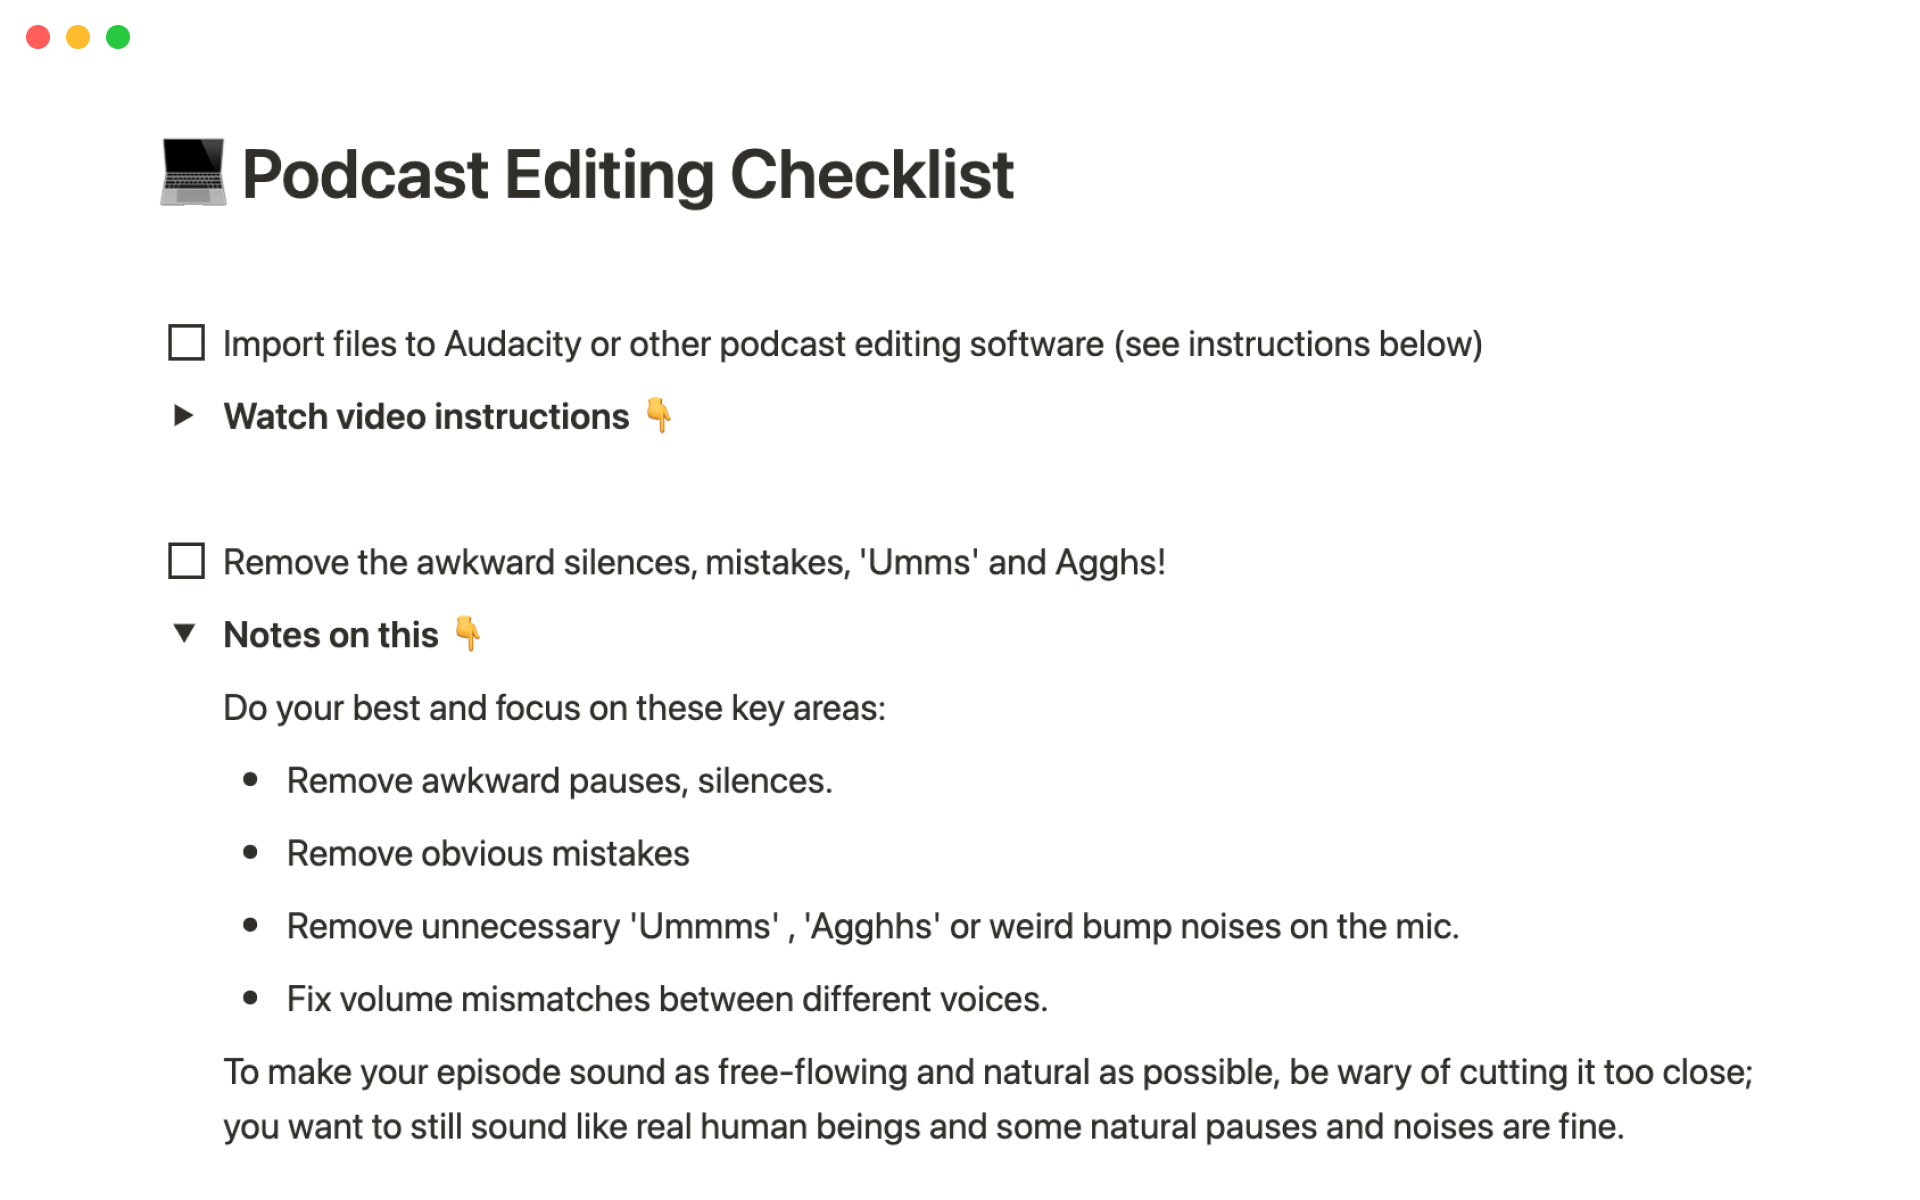 This template is perfect for running through a consistent process when producing ongoing podcast episodes.